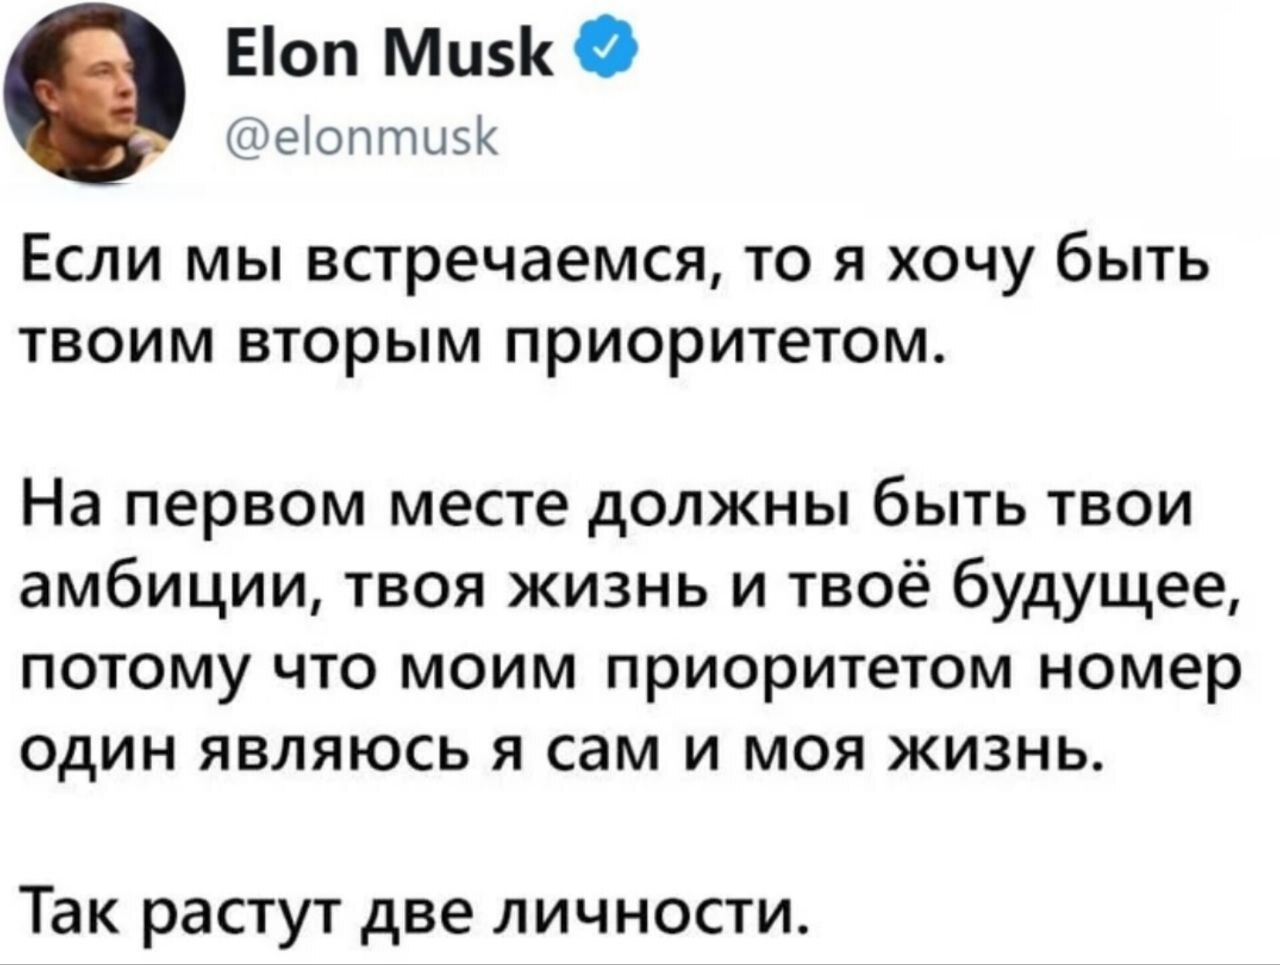 Instructions for correct relationships from a reptilian - My, Success, Self-development, Development, Experience, Relationship, Perfection, Personality, Ideal, Elon Musk, Liberty, Reasoning, Priorities, Twitter, Screenshot